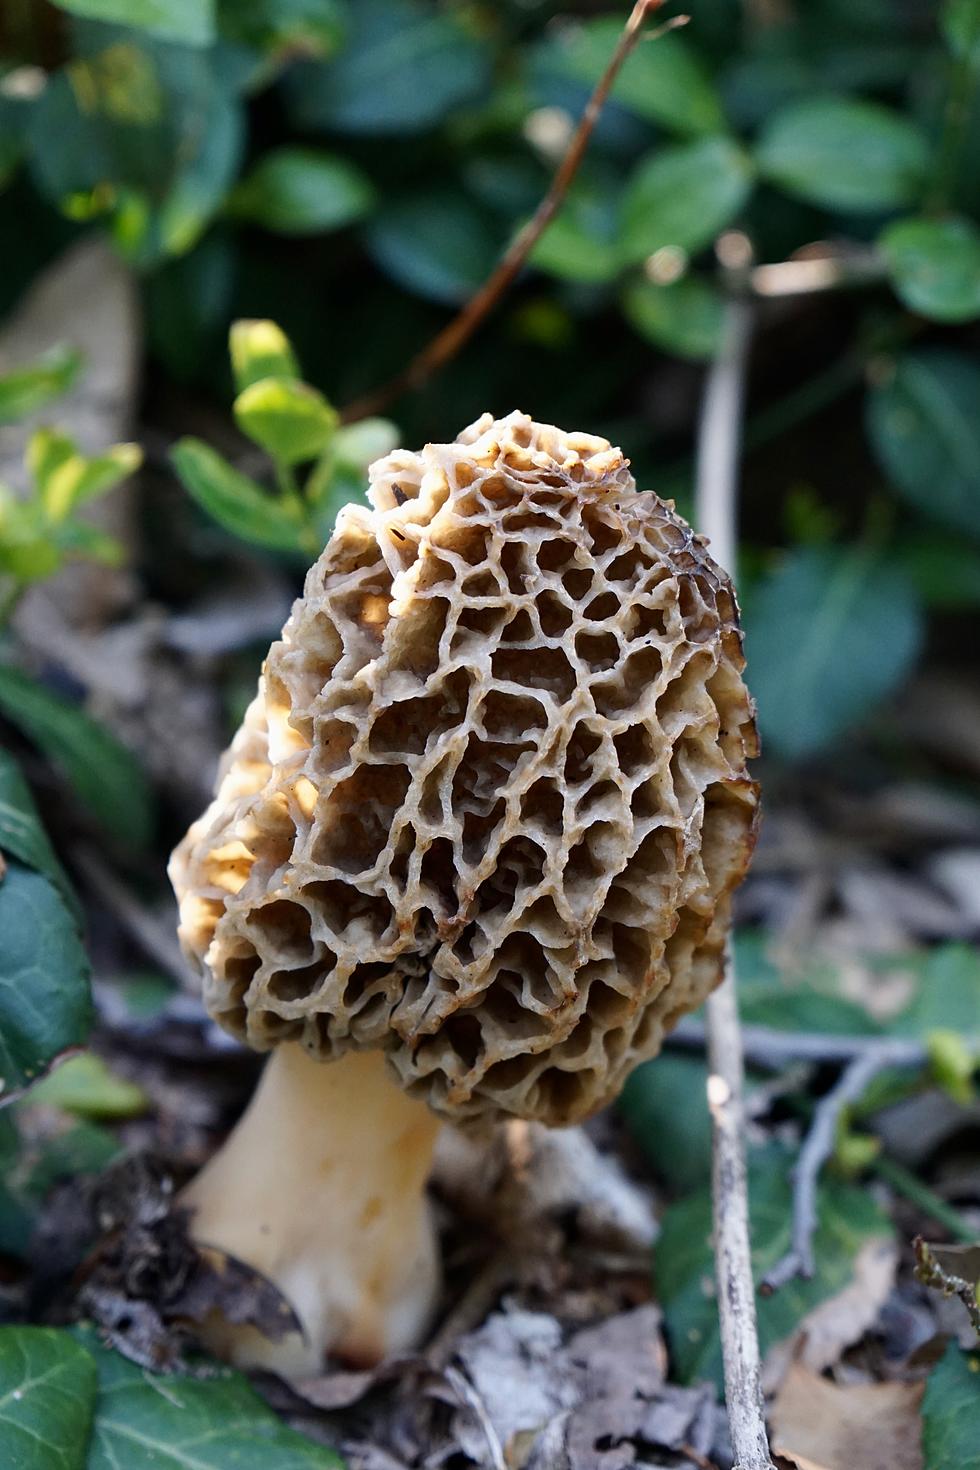 Morel Mushrooms Spotted in Southern Indiana &#8211; Here&#8217;s What You Need to Know About Mushroom Hunting in 2022